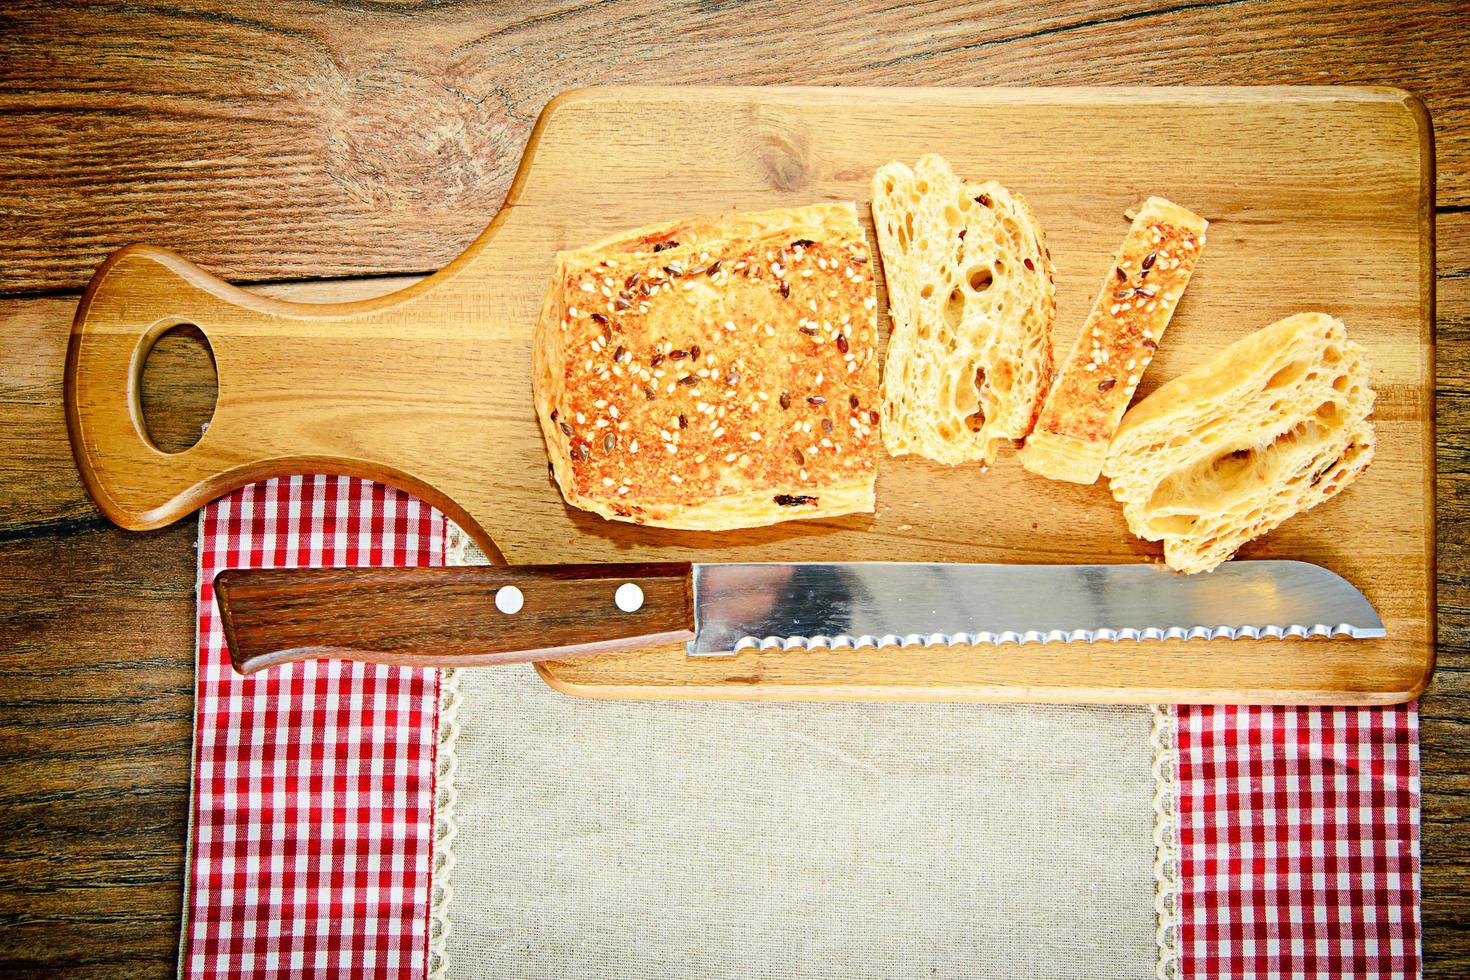 Sliced Bread with Sesame Seeds on a Wooden Board photo